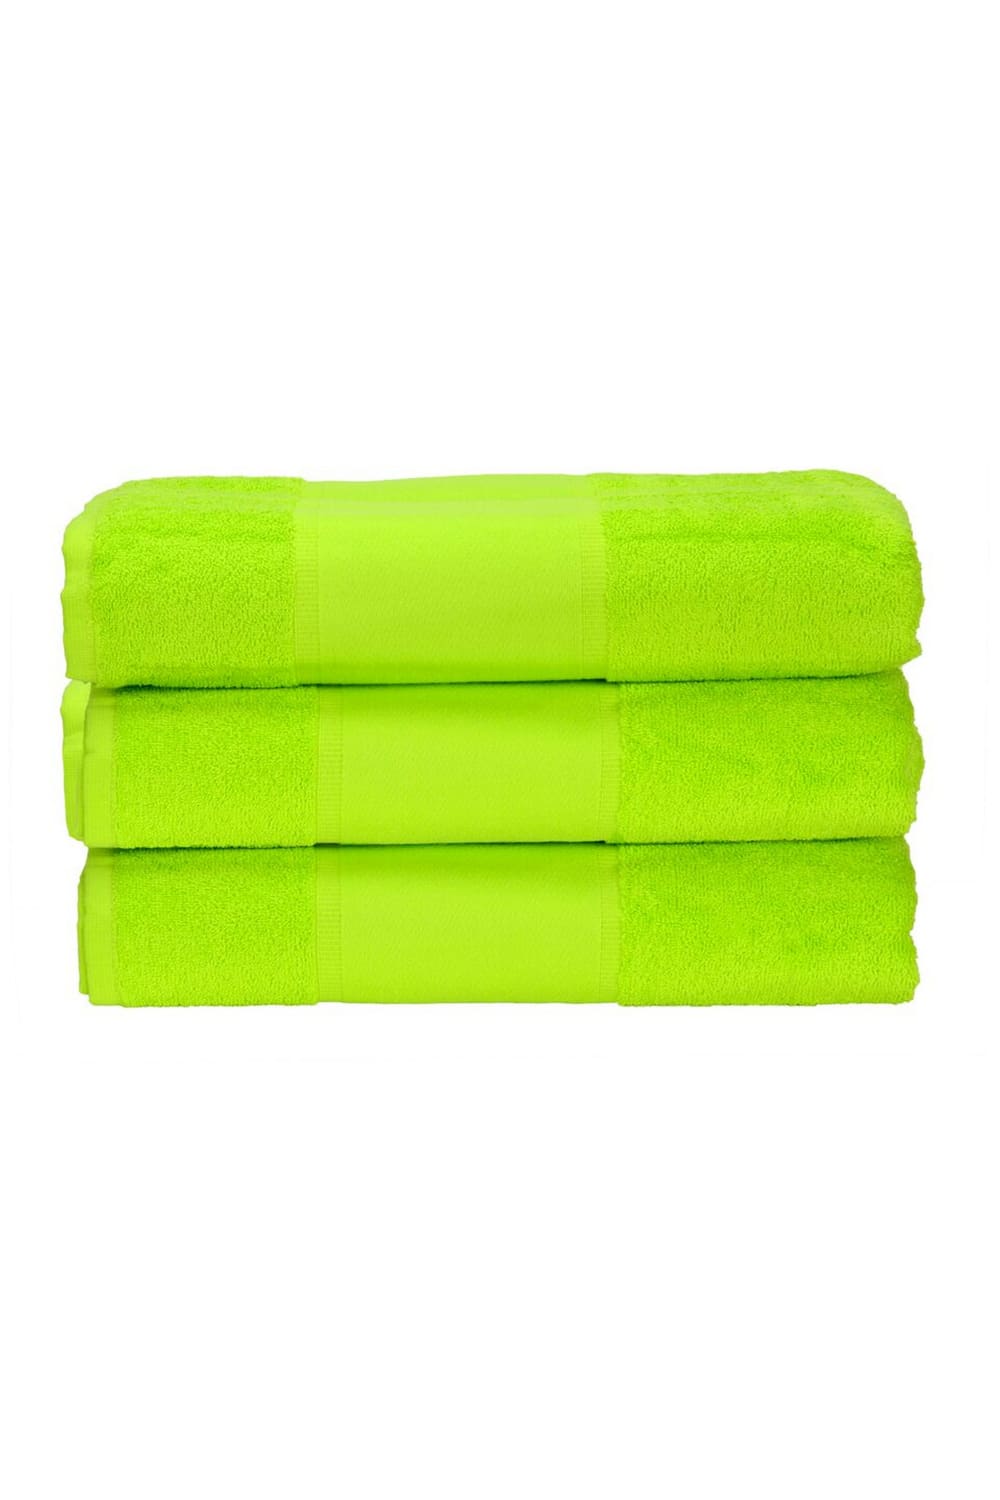 A&R Towels Print-Me Hand Towel (Lime Green) (One Size)